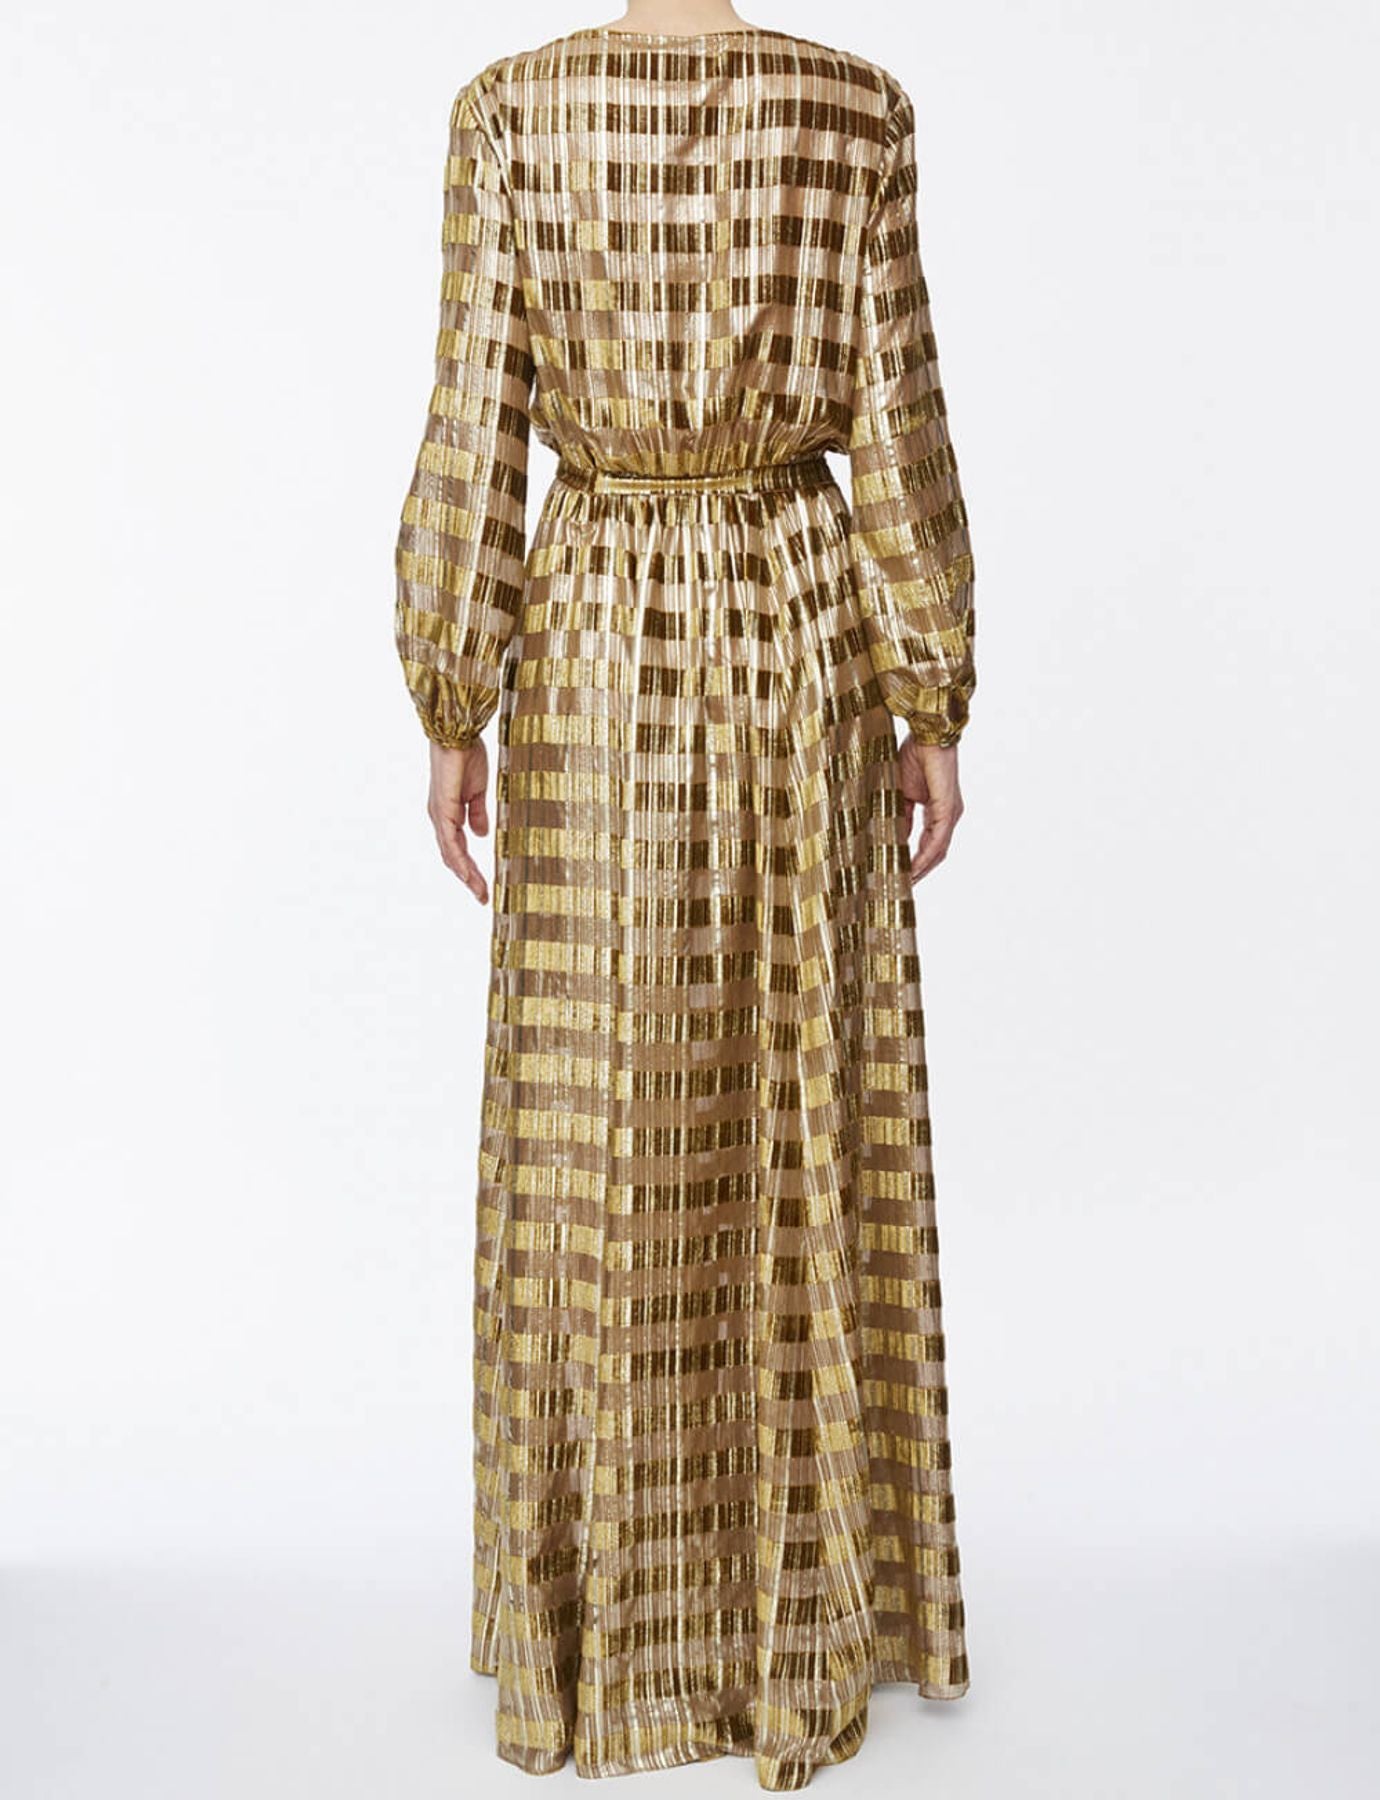 dressed-adele-velour-and-lurex-gold